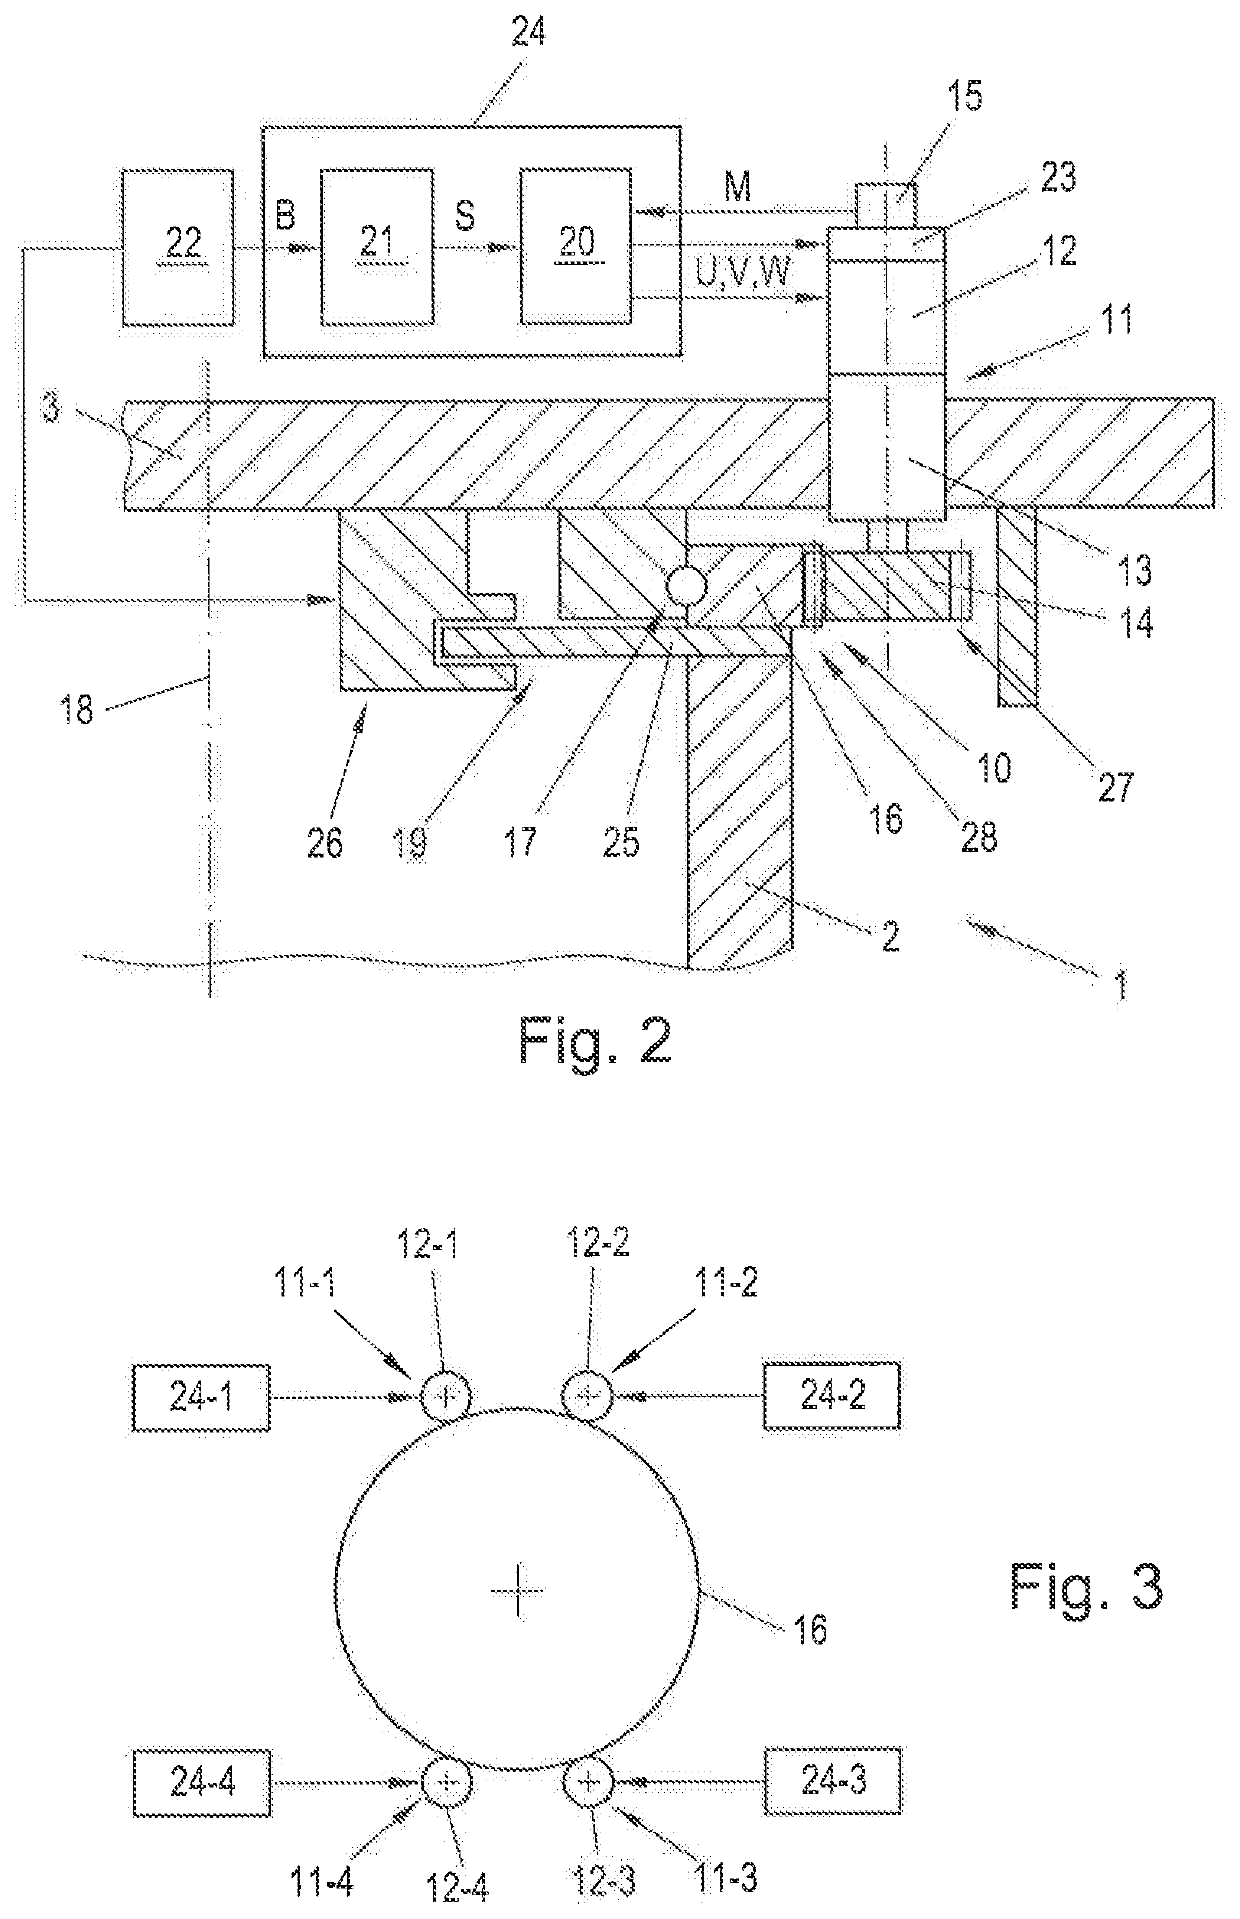 Method for adjusting an adjustment device of a wind power plant